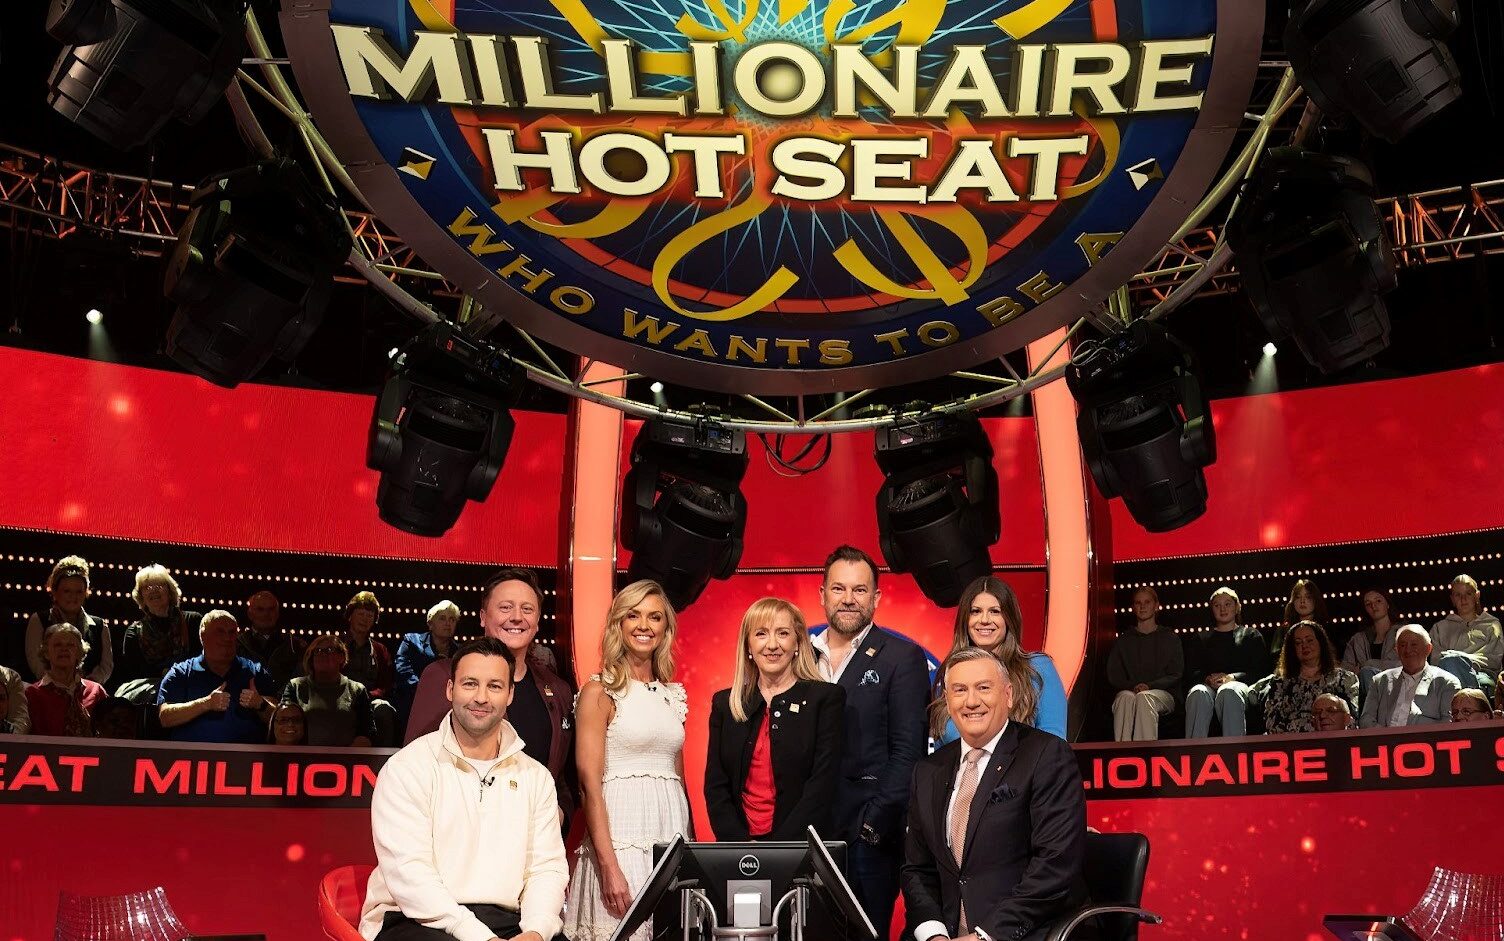 Millionaire Hot Seat on Channel 9 My Room Children's Cancer Charity special